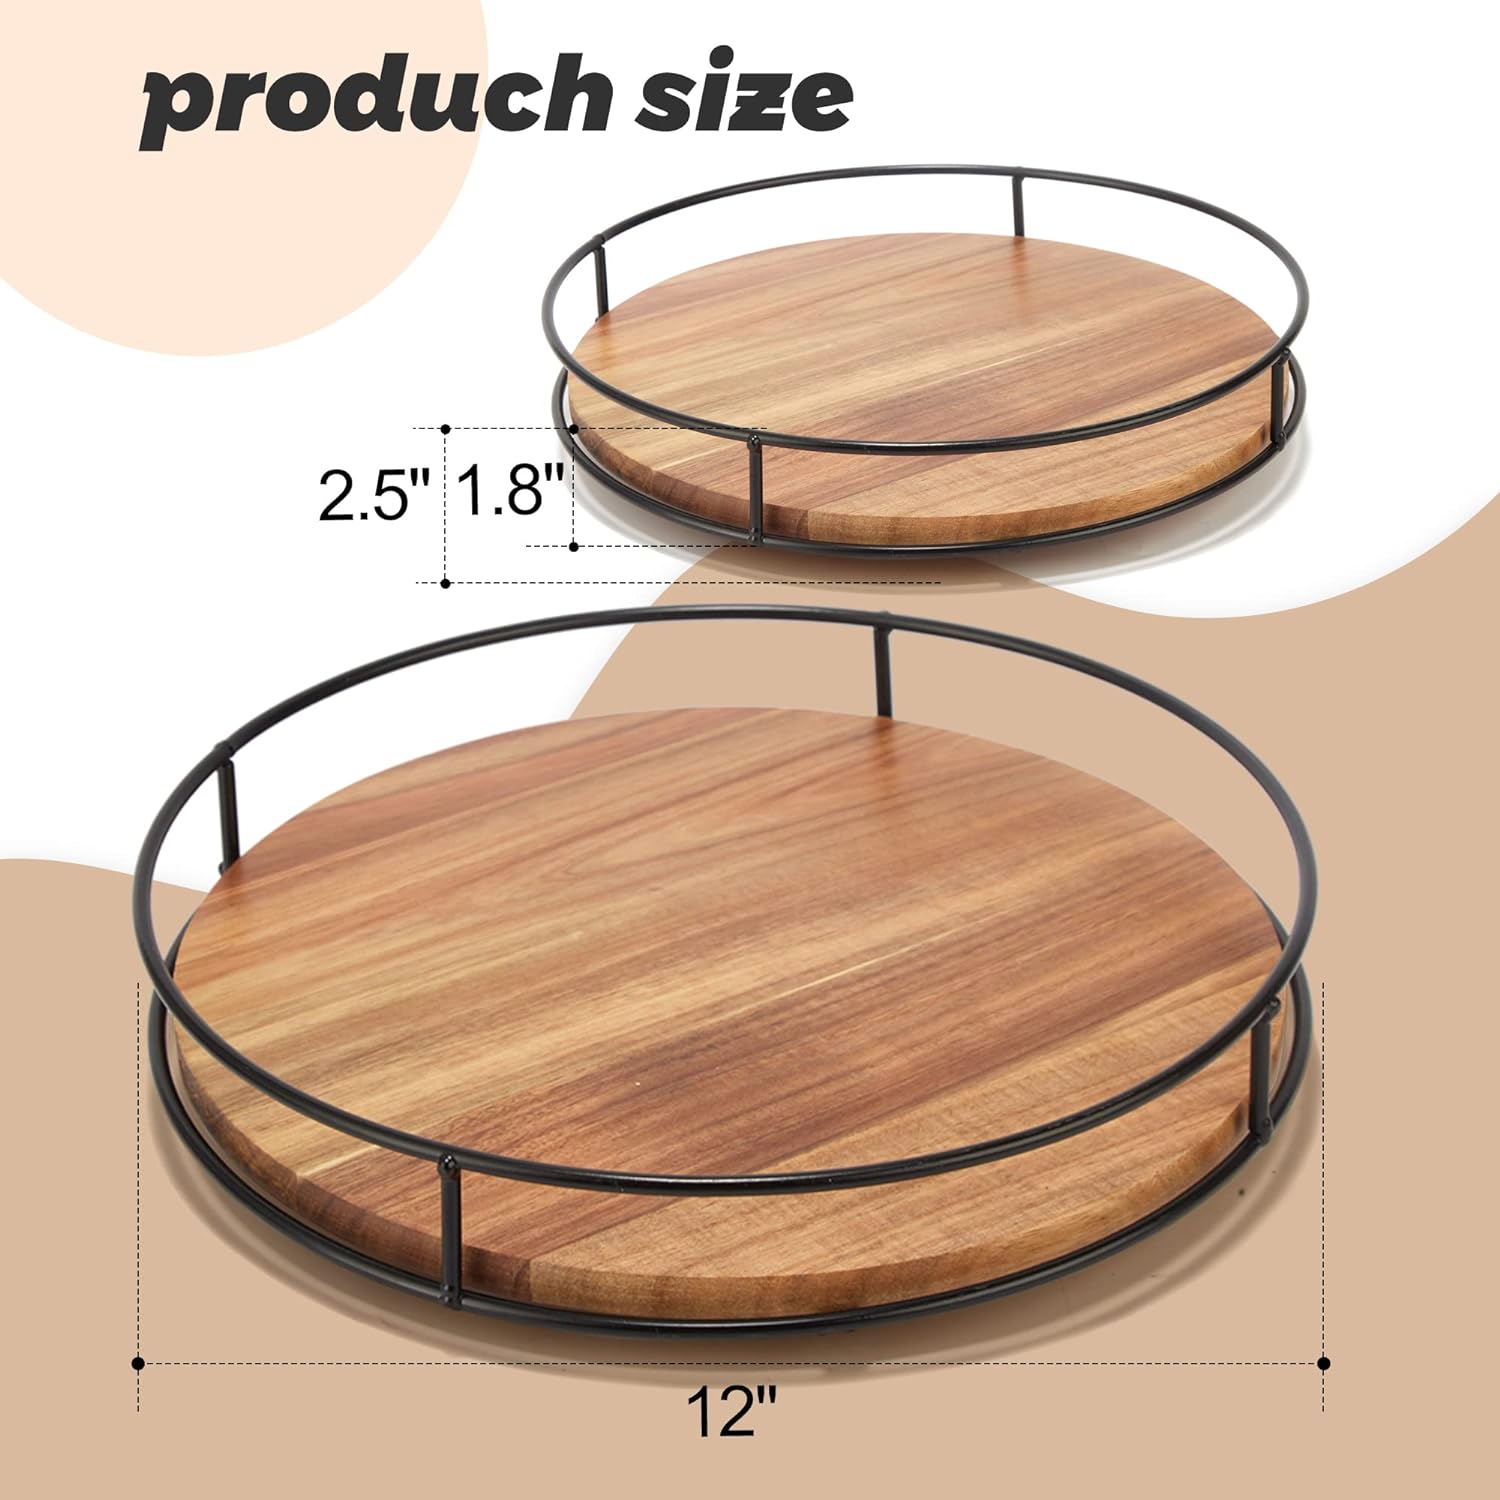 12 Acacia Wood Lazy Susan Turntable, Tomoaza Kitchen Organizer Turntable with Steel Sides, 360 Degree Turntable for Countertop Cabinet or Dining Table(Black)